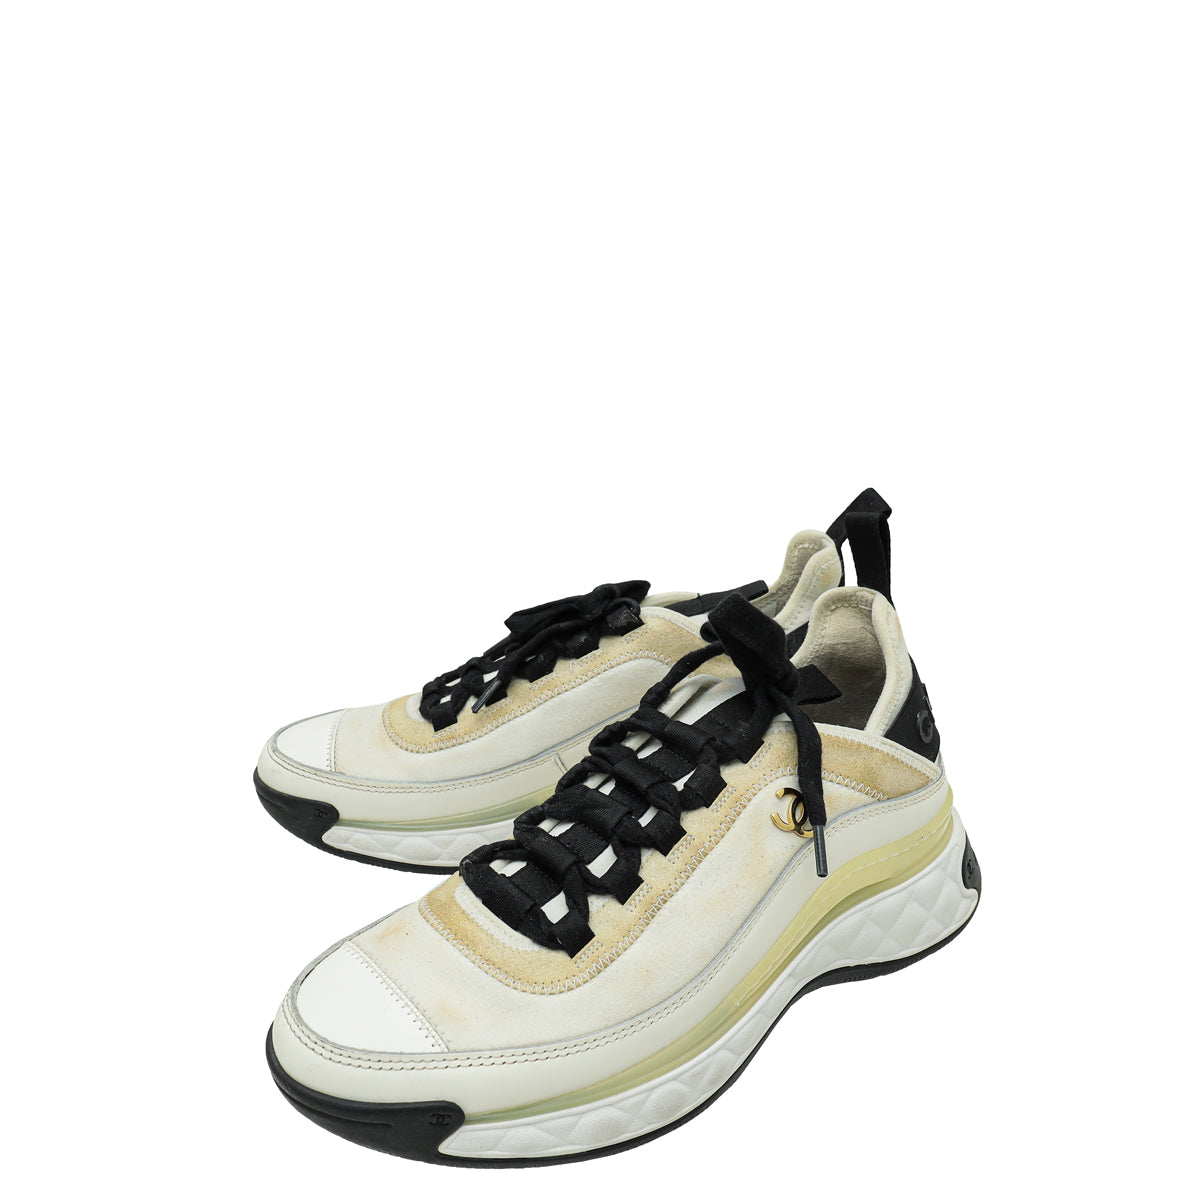 Chanel Bicolor Fabric And Suede CC Lace Up Sneakers 37